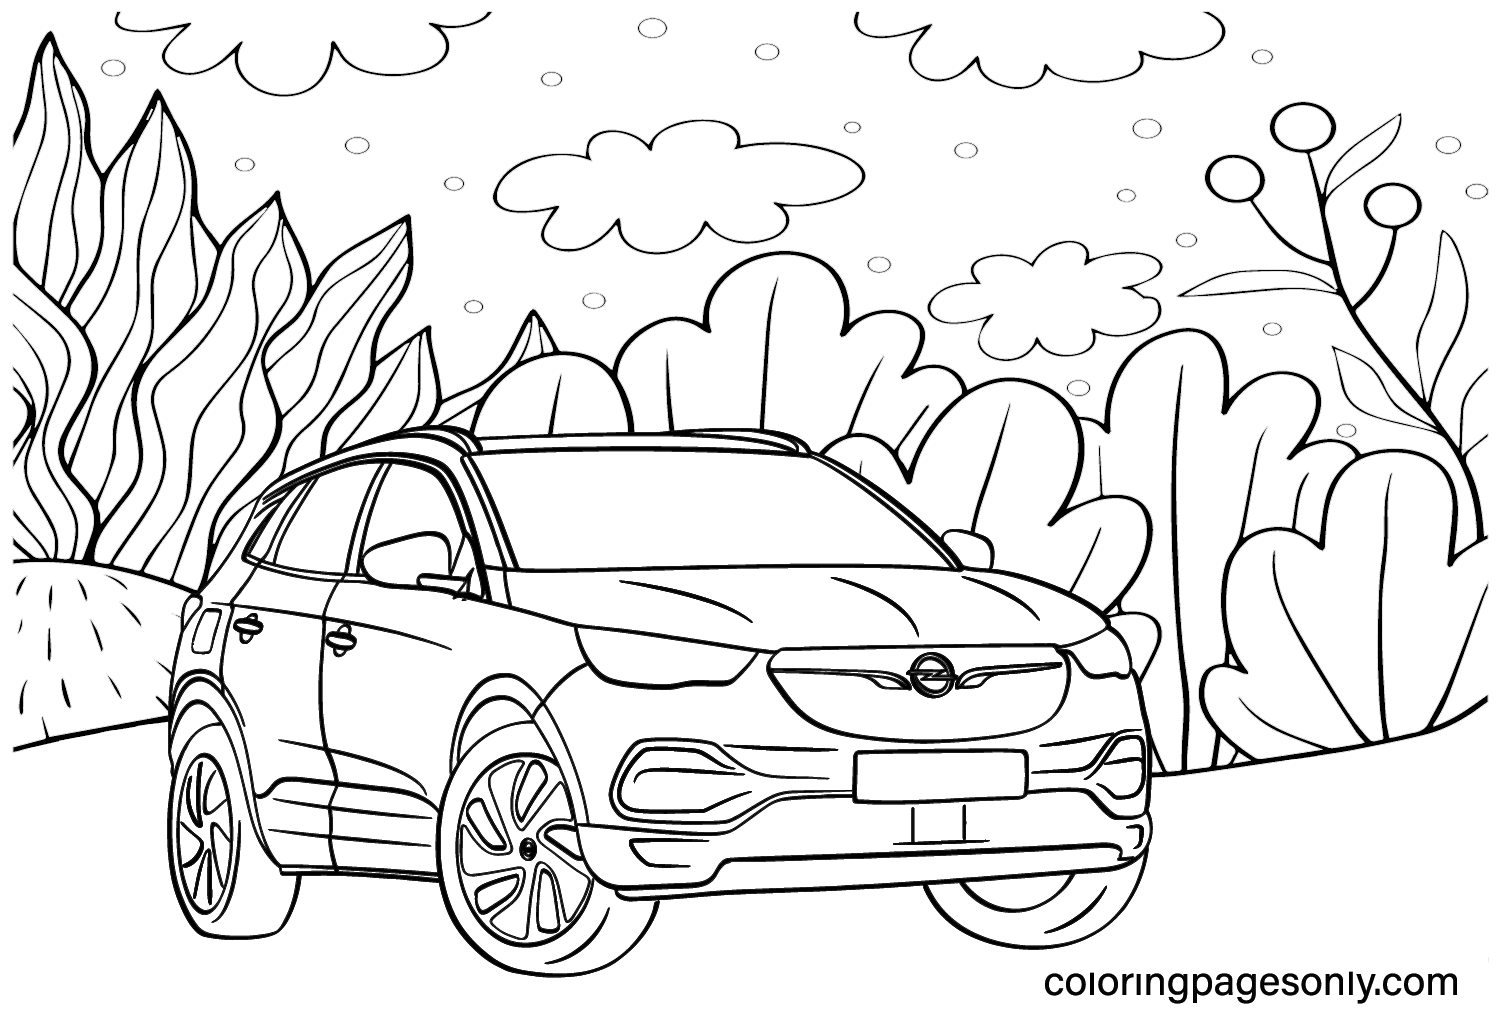 Opel Car Coloring Page from Opel